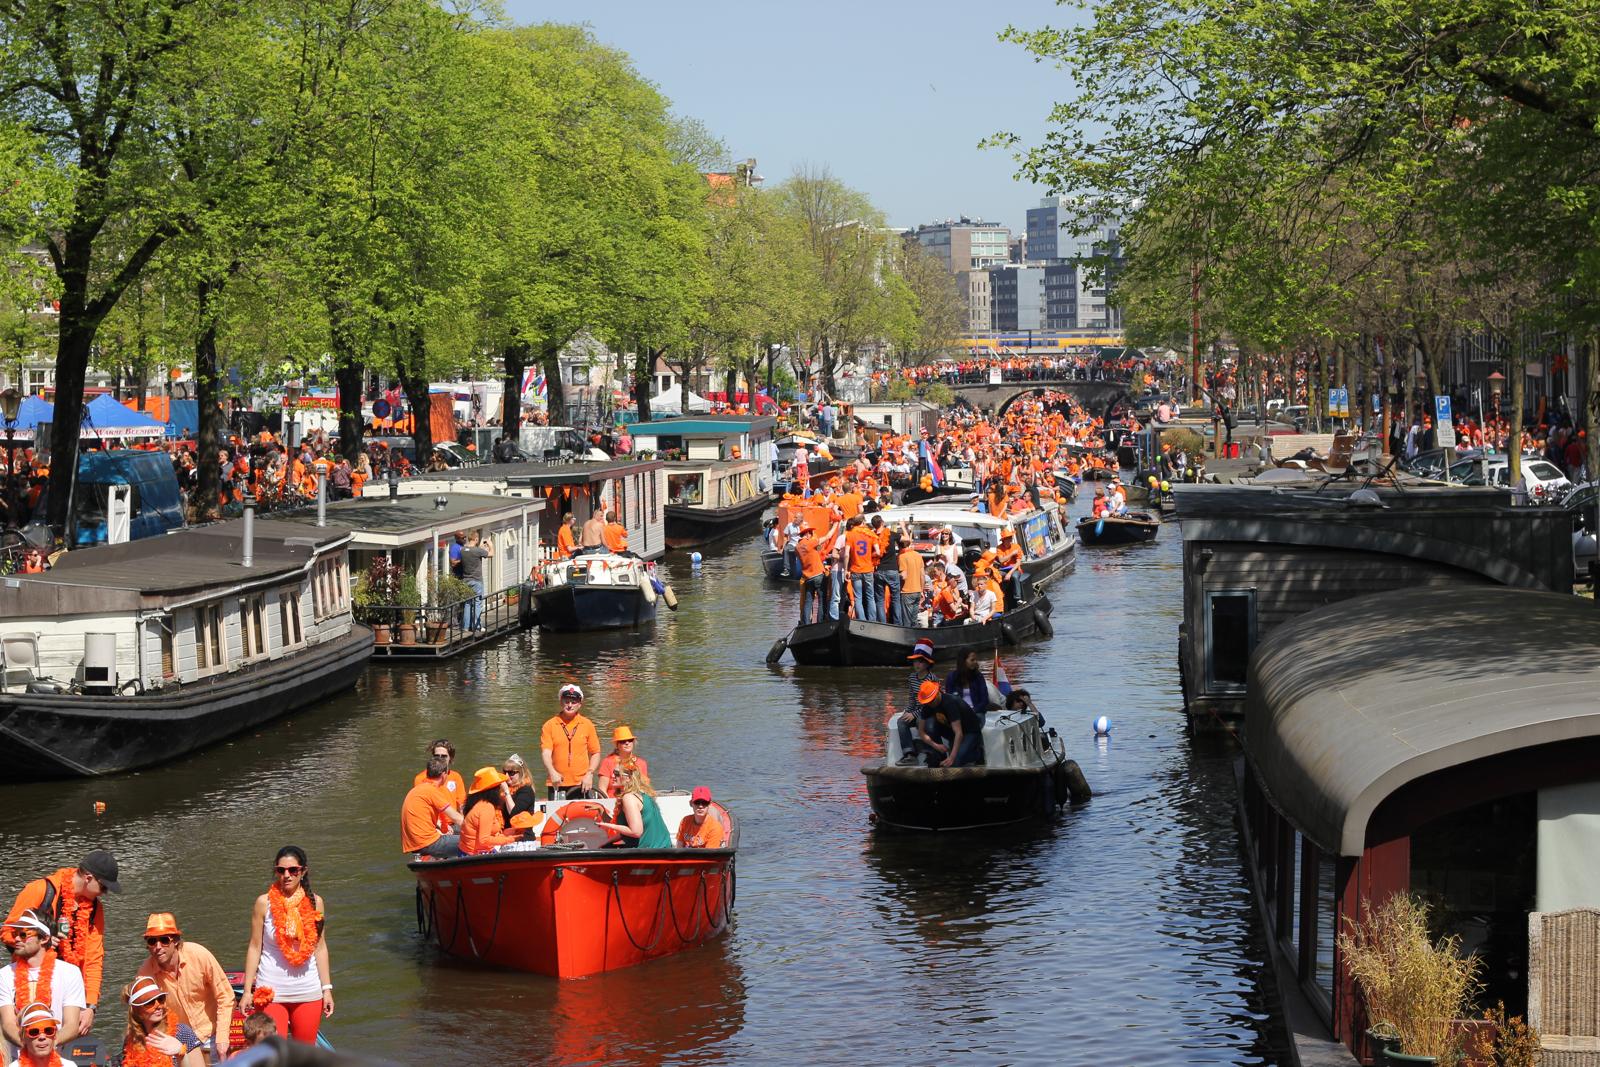 Queen's Day Parade on the Canals